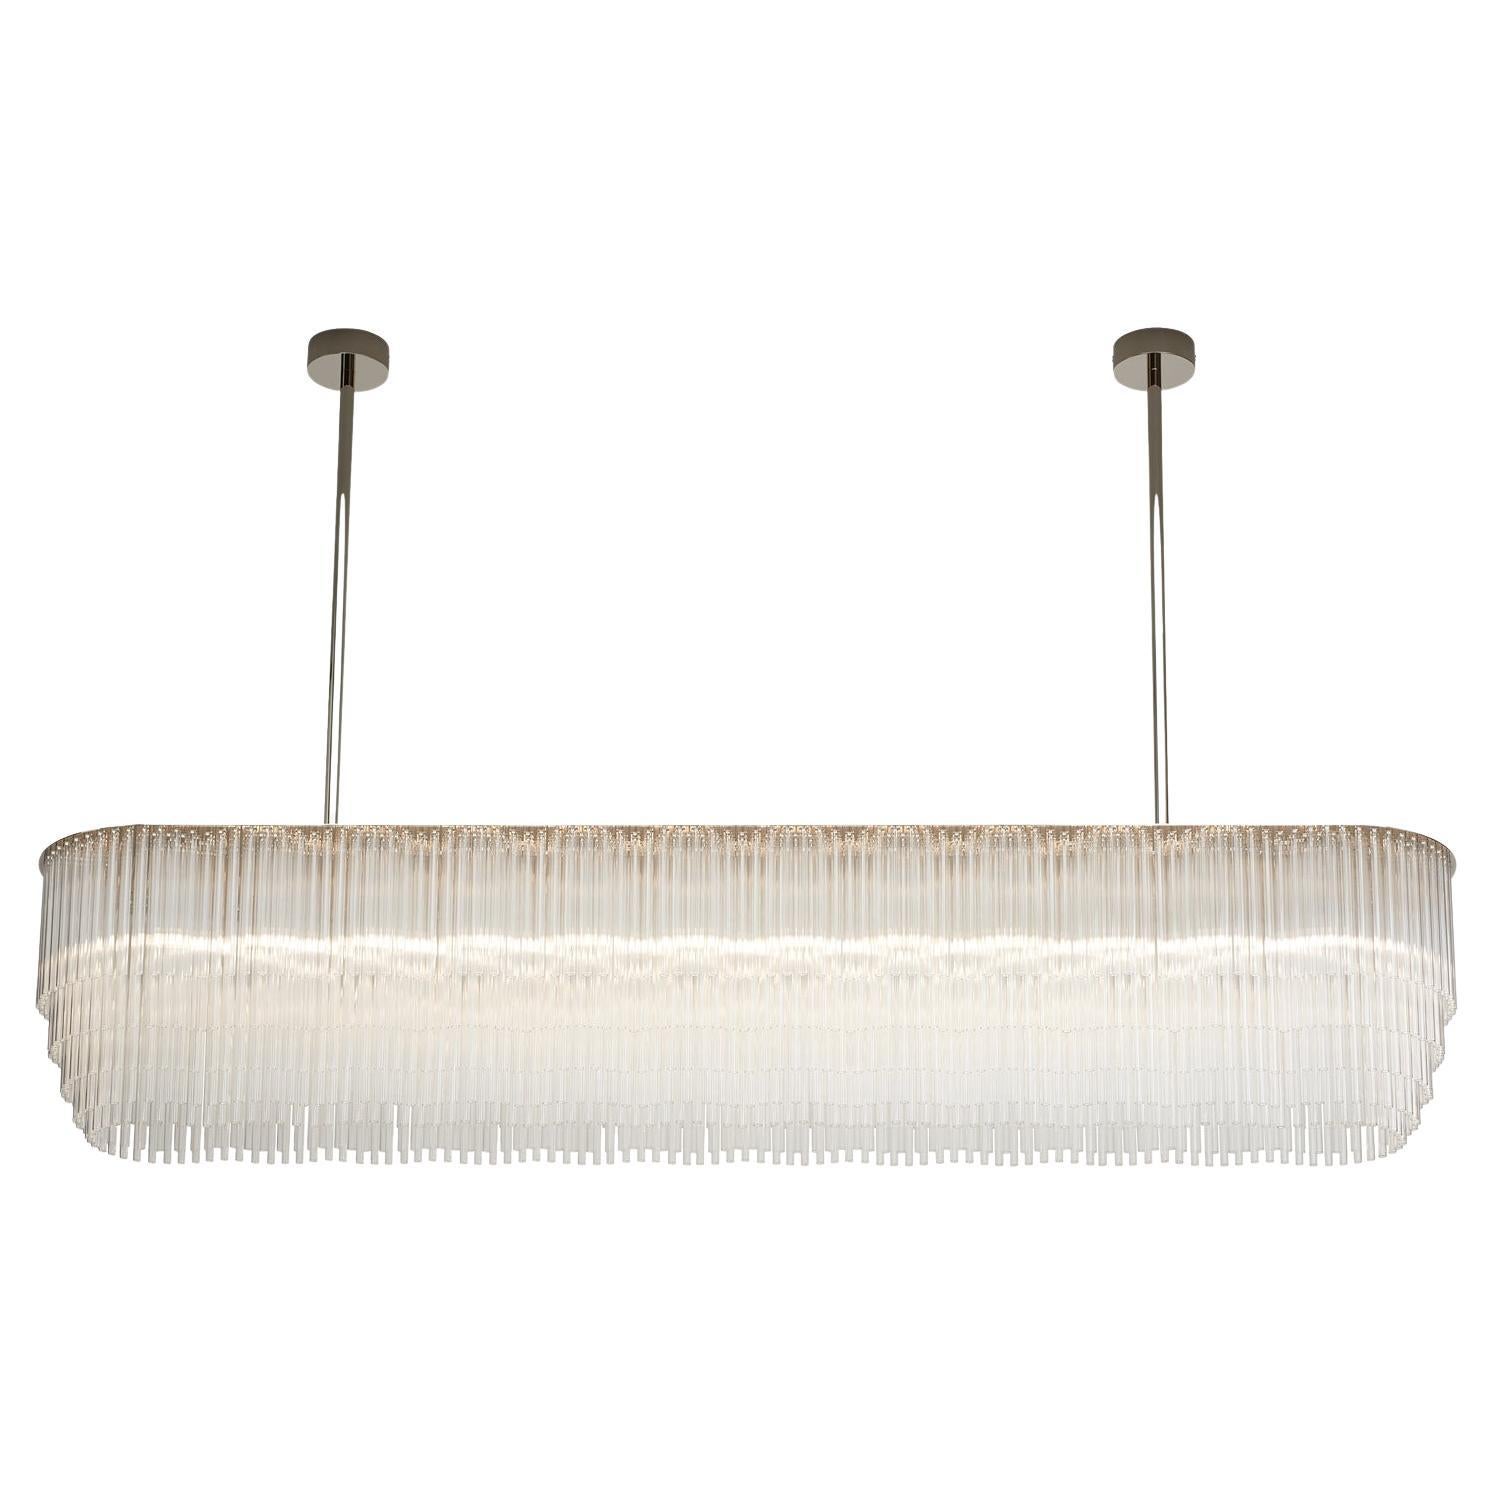 Linear Chandelier 1370mm / 54" in Polished Nickel with Tiered Glass Profile